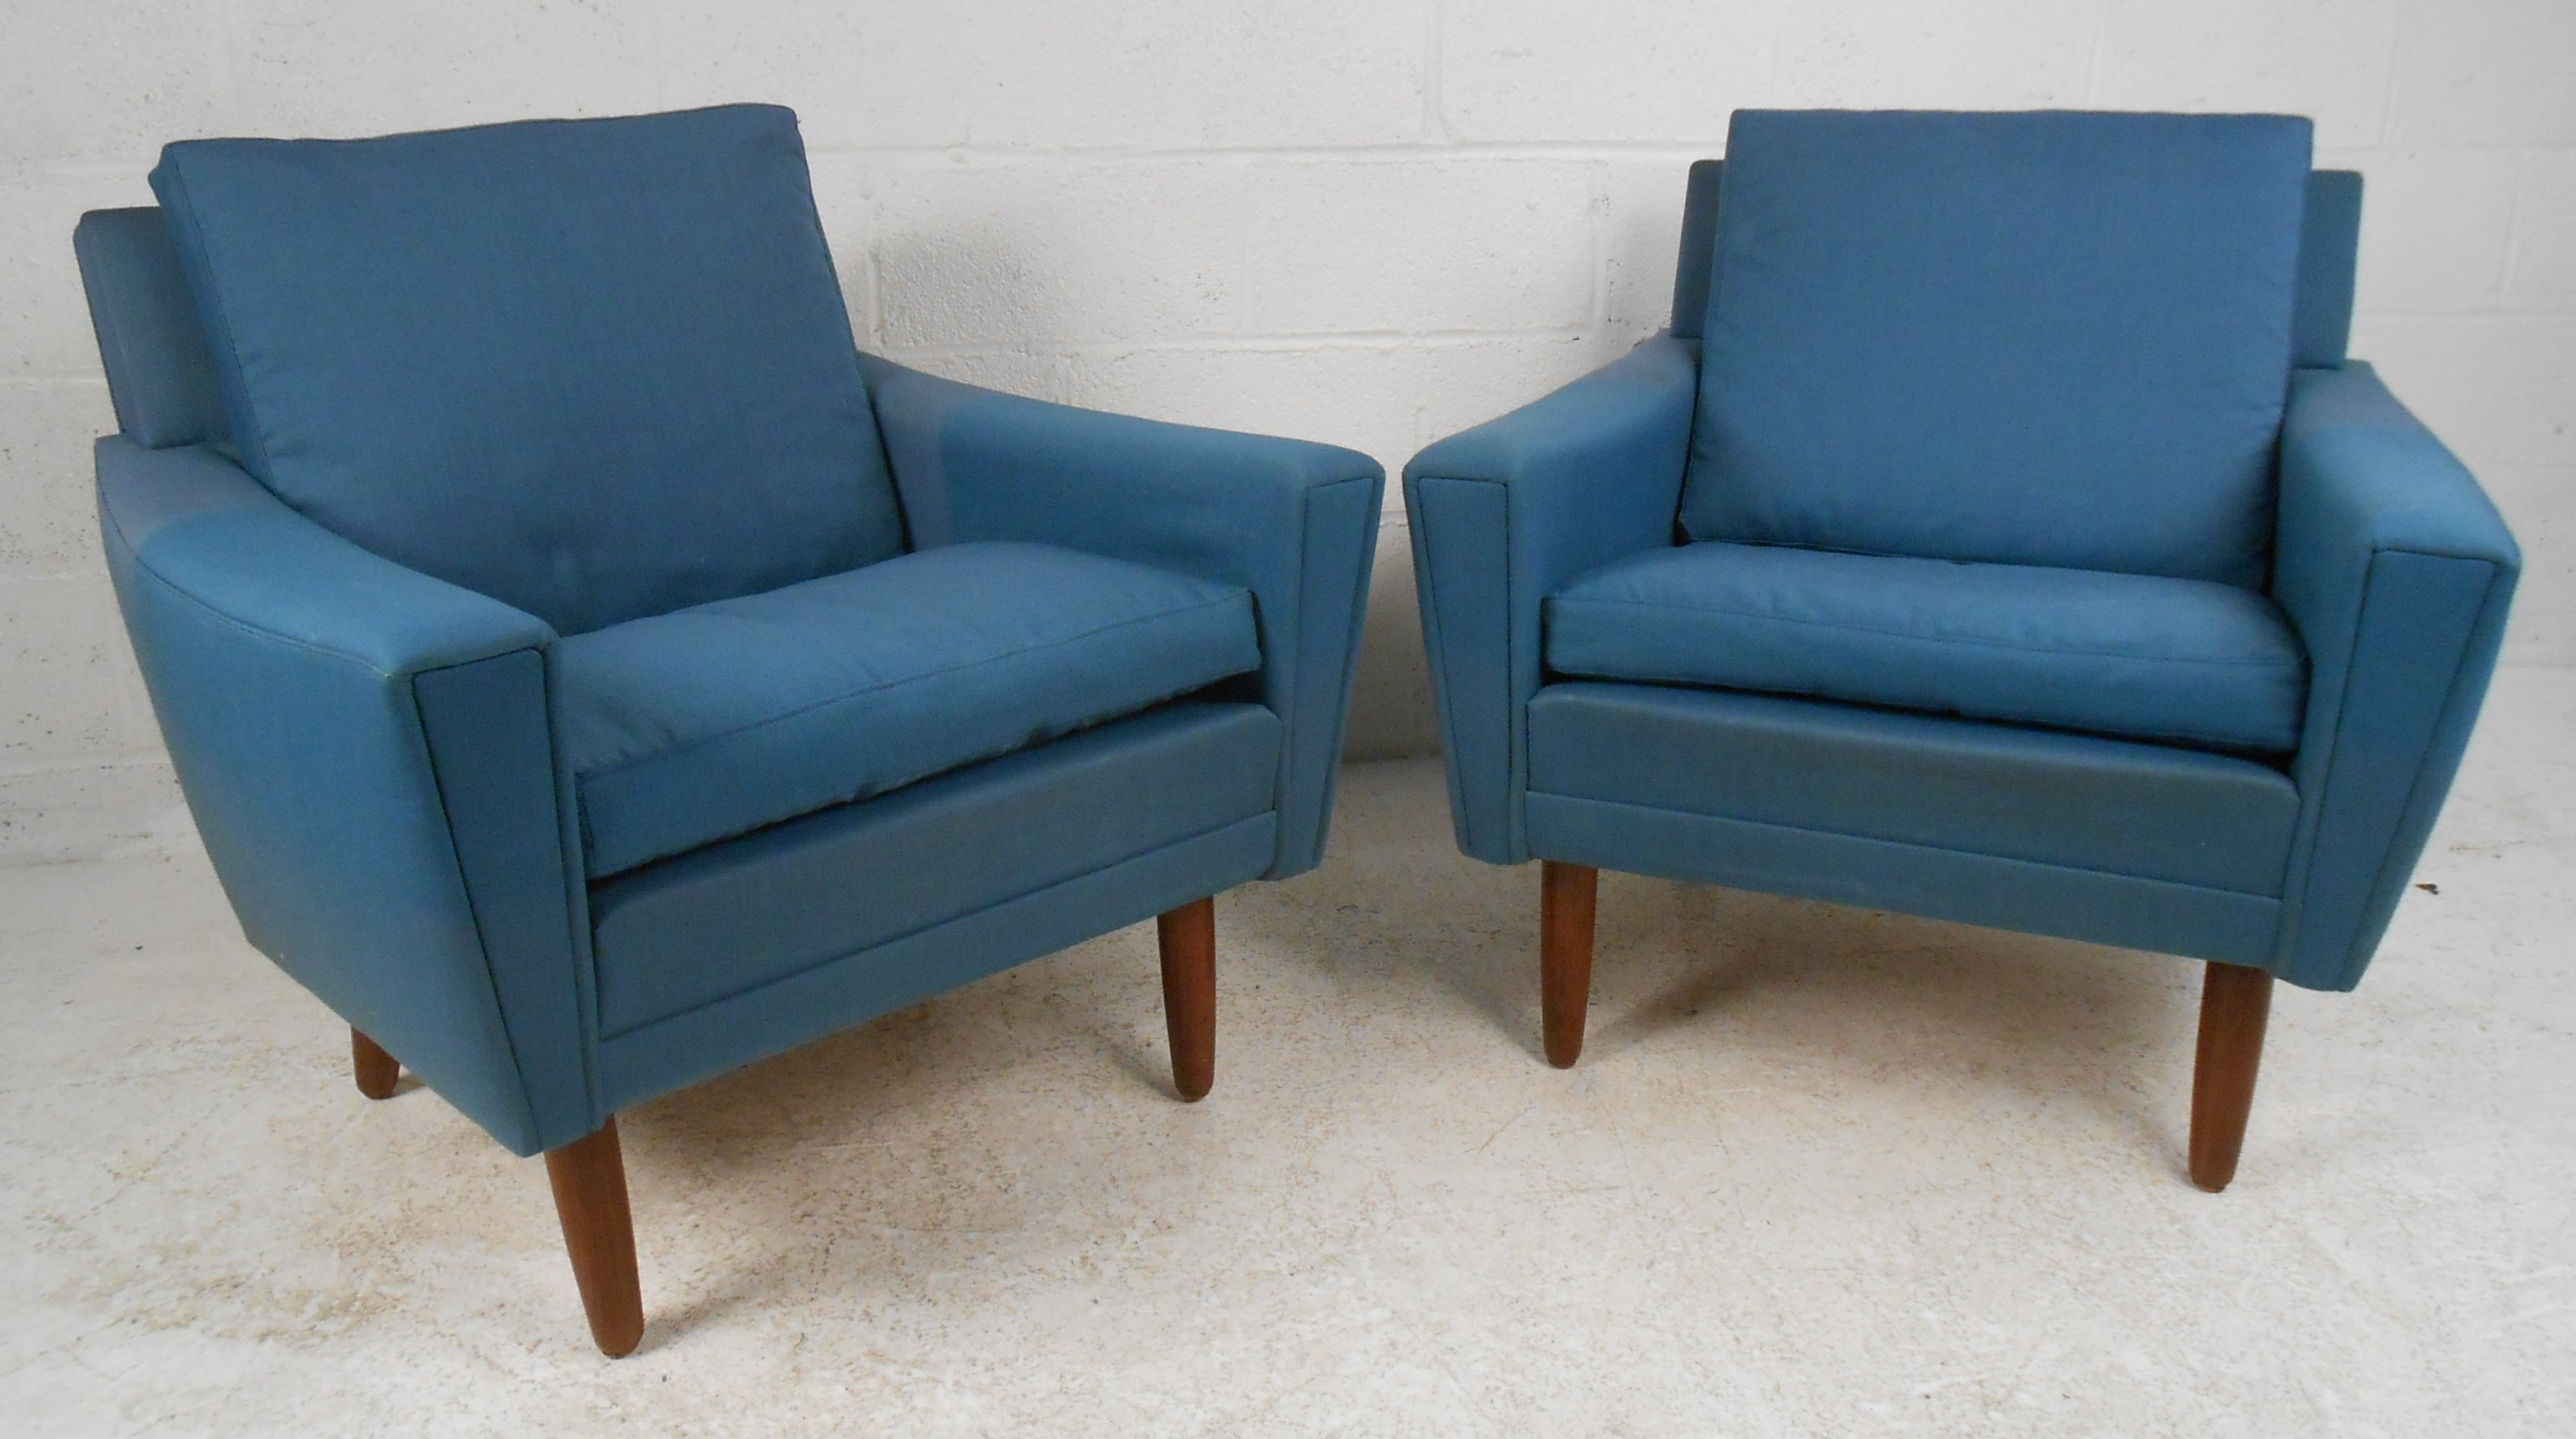 Pair of Mid-Century Modern Upholstered Club Chairs